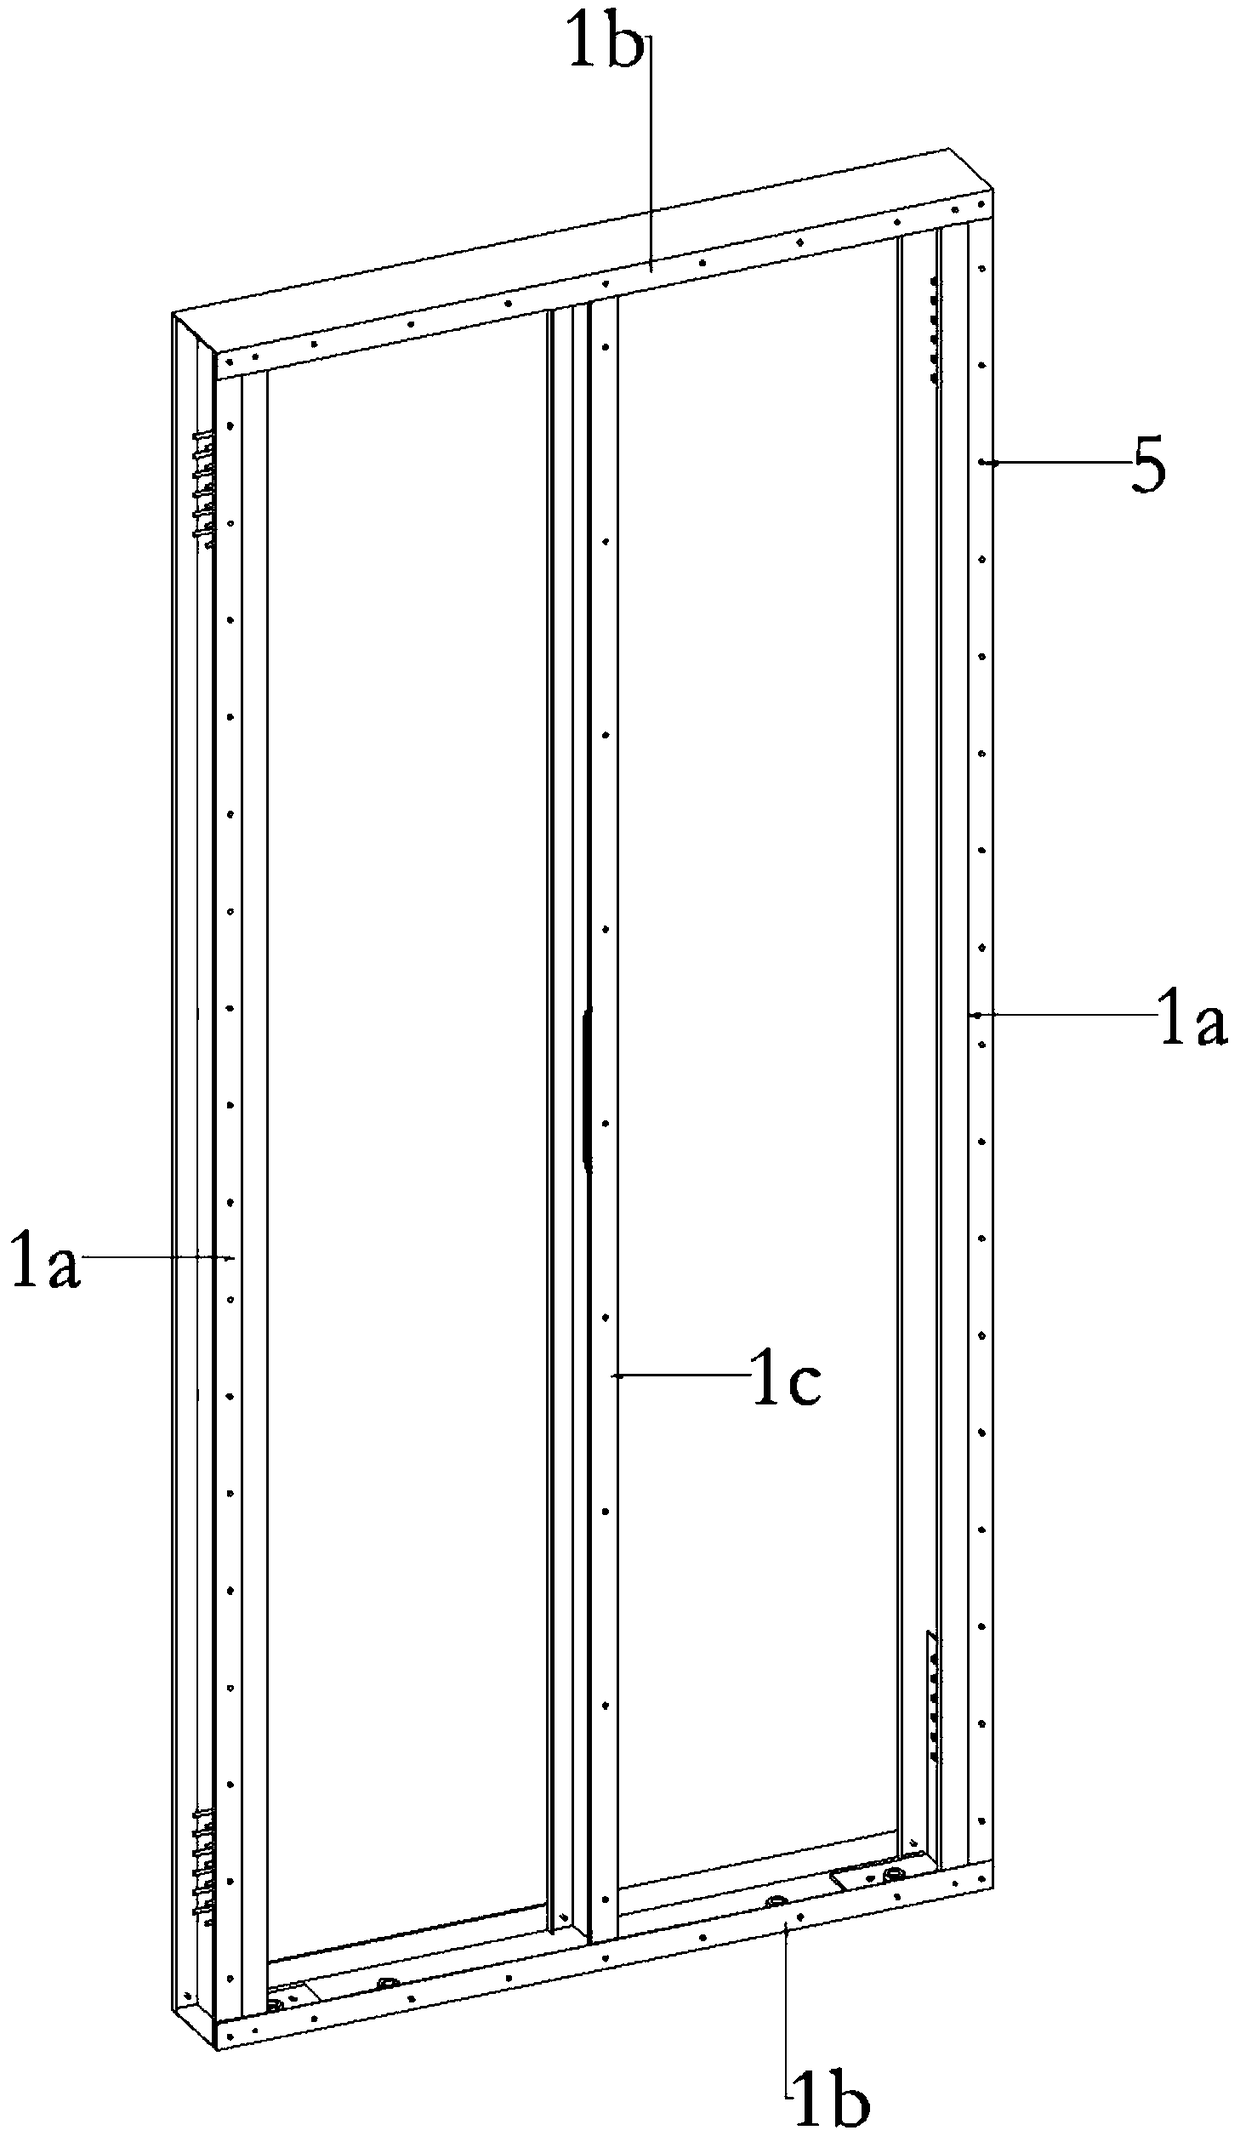 Fabricated thin-walled cold-formed steel combined damping wall